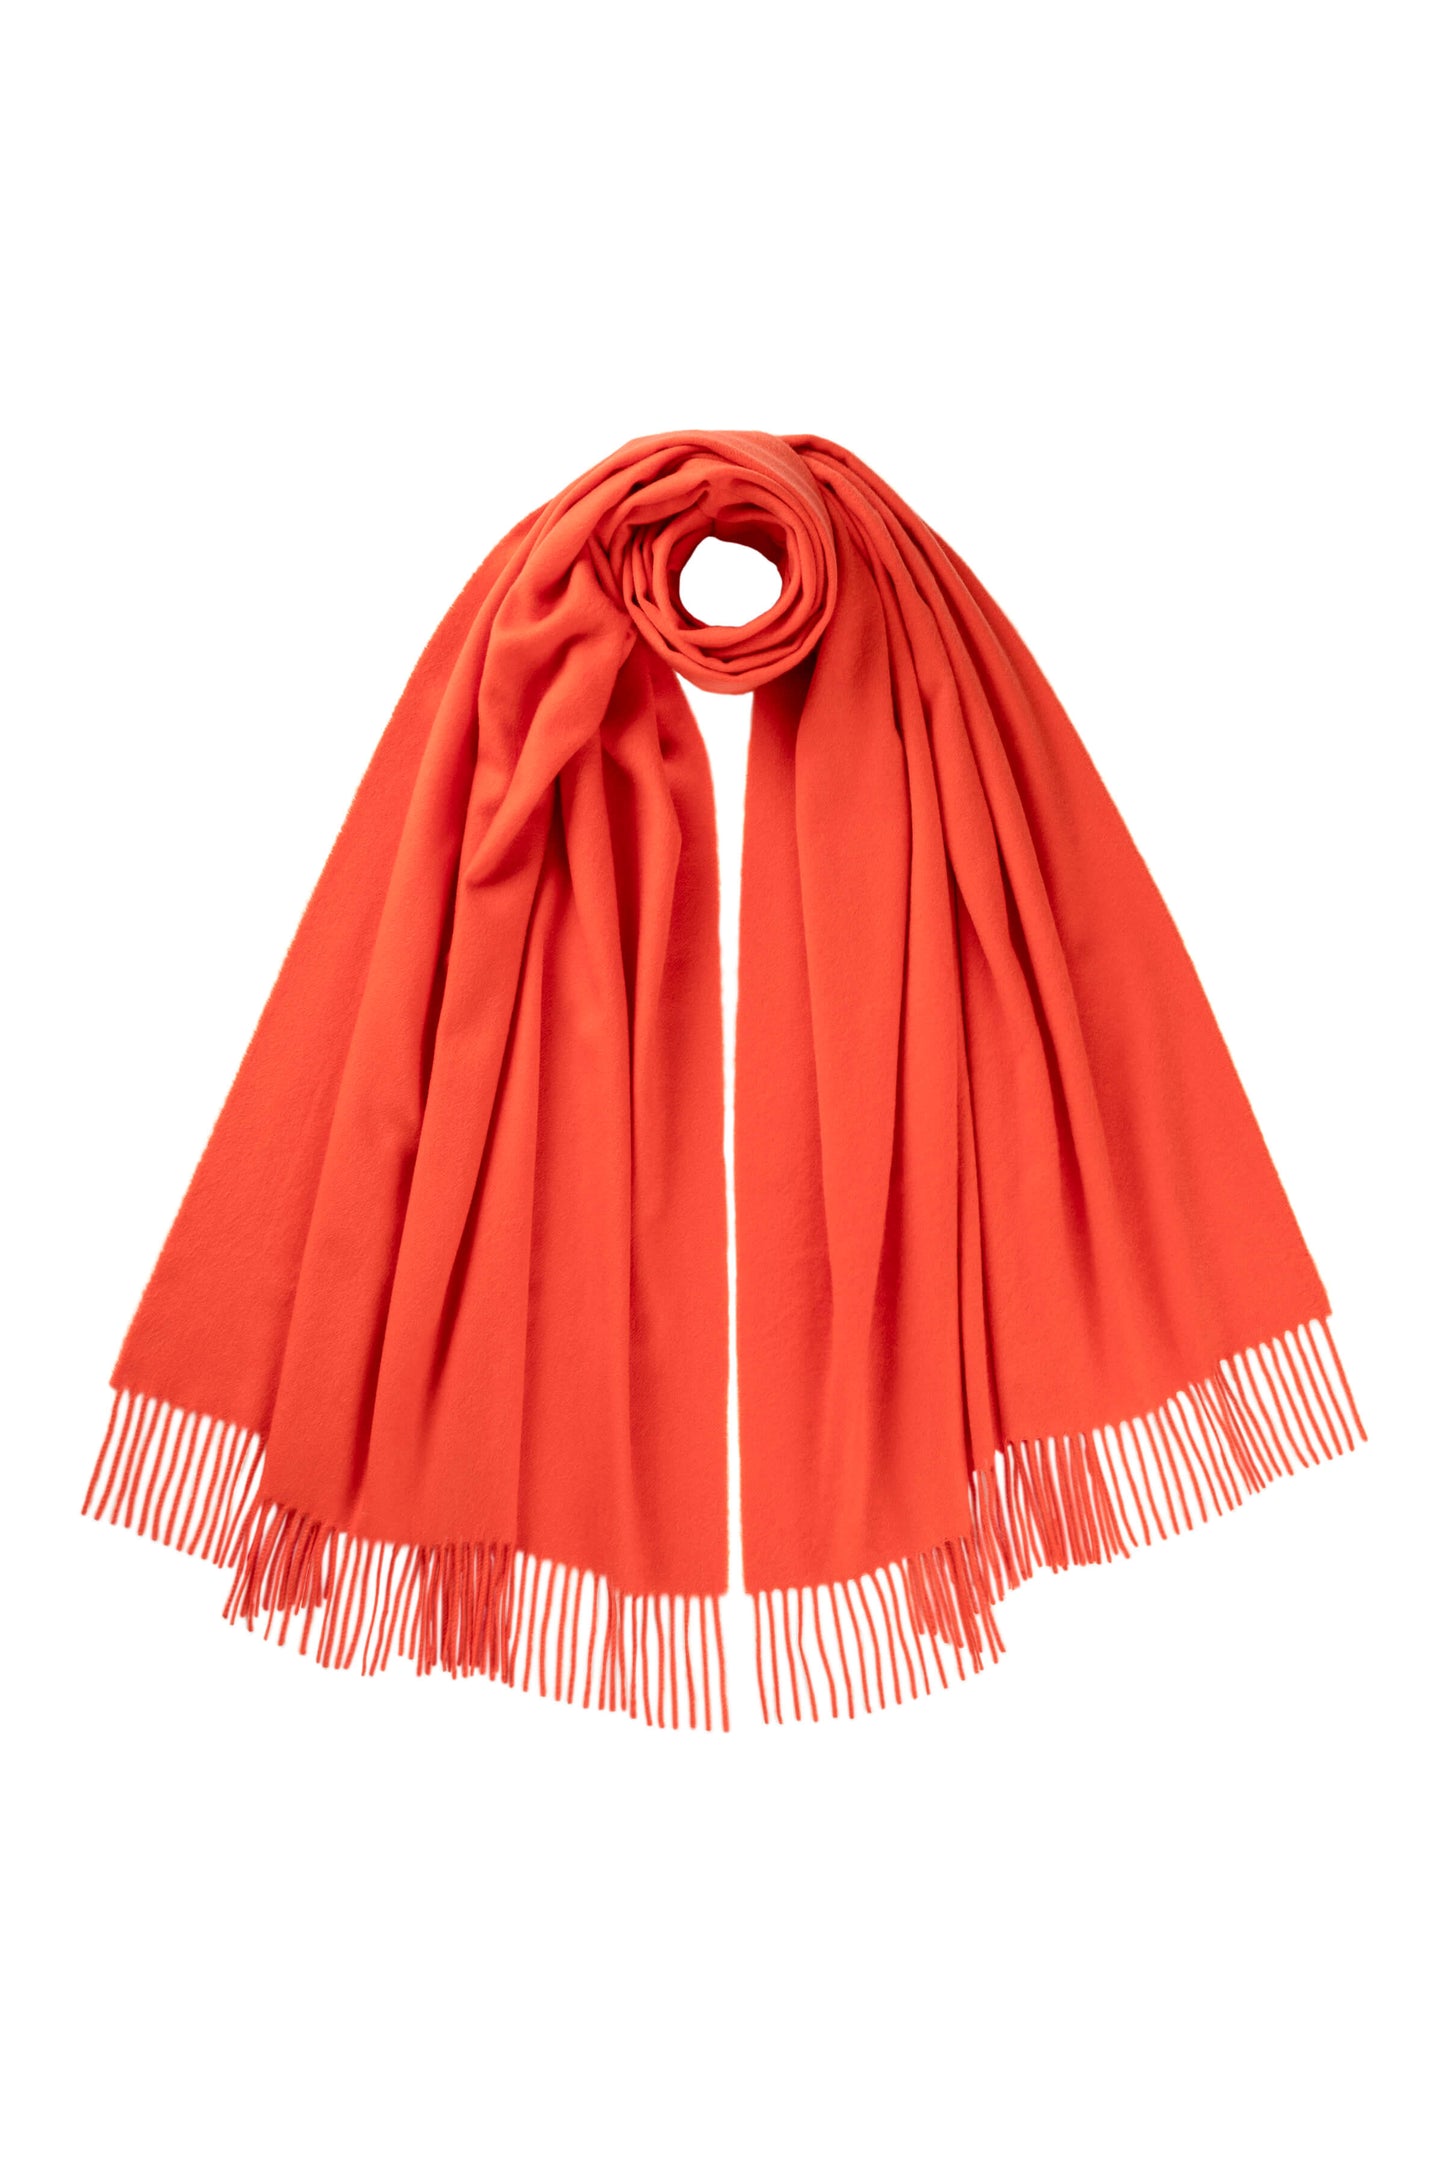 Johnstons of Elgin SS24 Accessories Coral Plain Cashmere Stole WA000056SG4980ONE